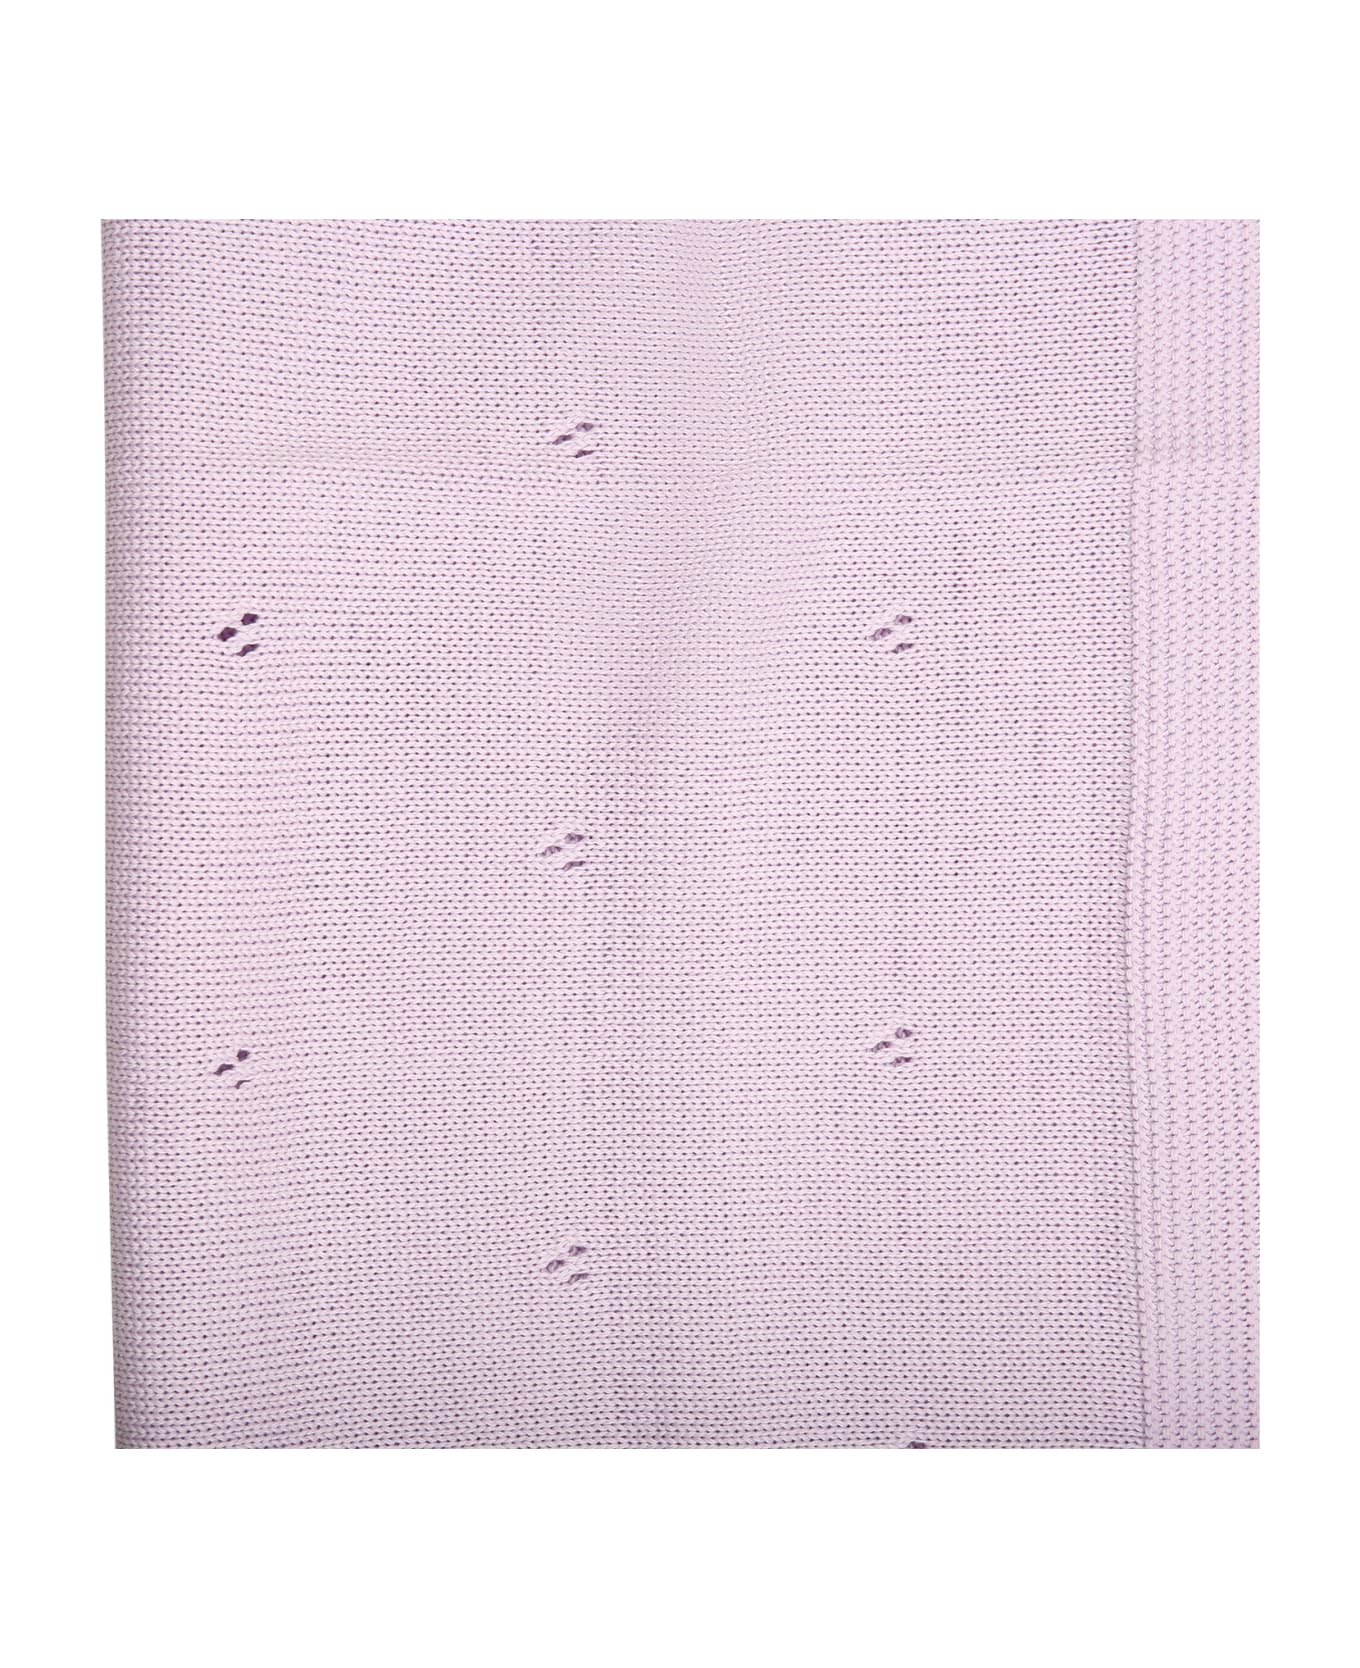 Little Bear Wisteria Baby Blanket For Baby Girl - Glicine アクセサリー＆ギフト